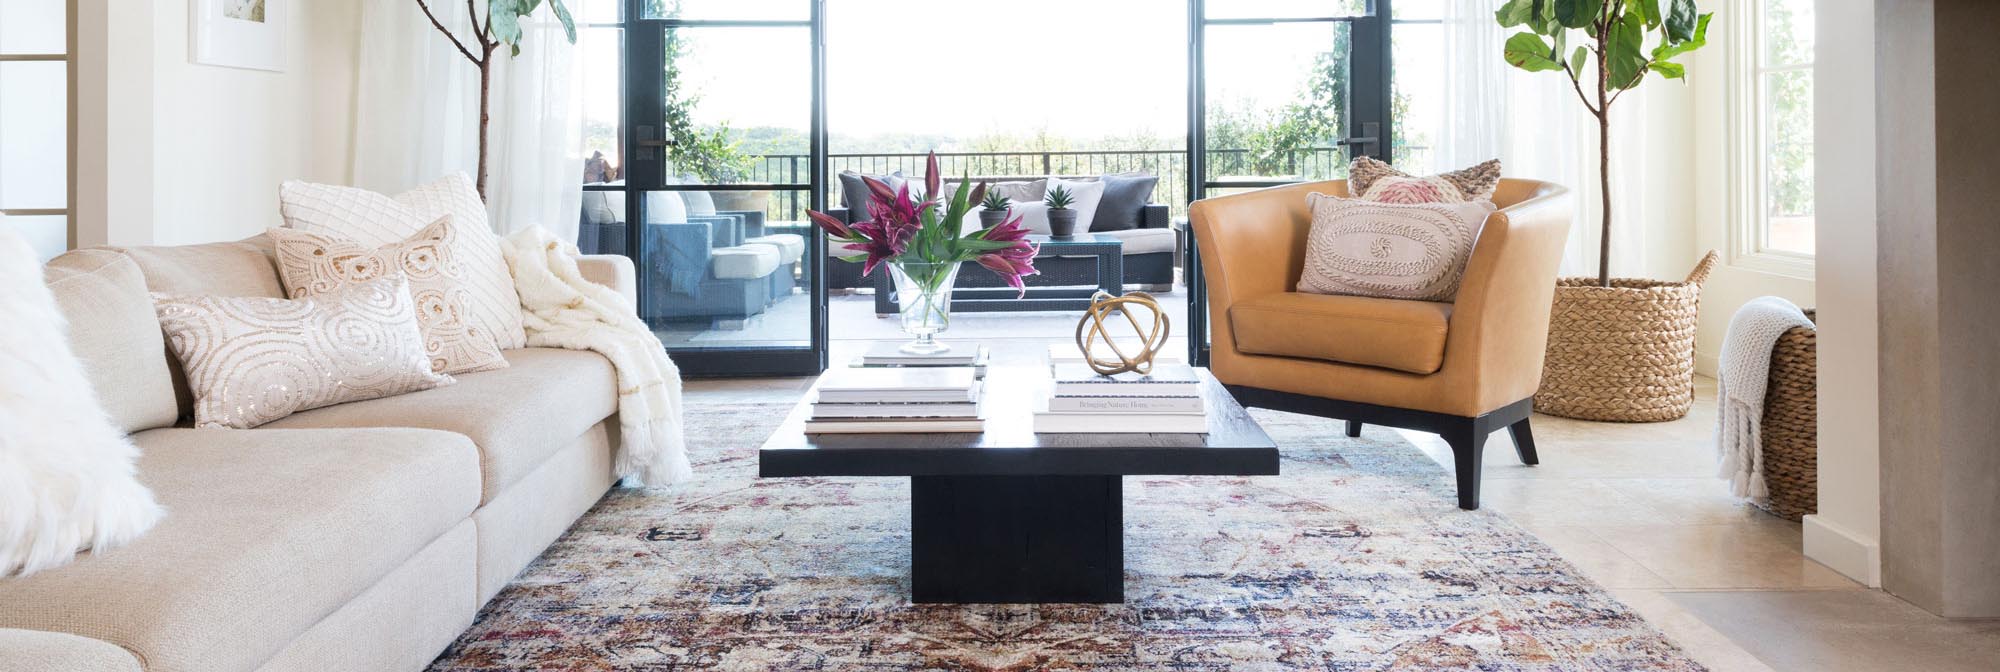 How to Choose the Right Size Rug by Room